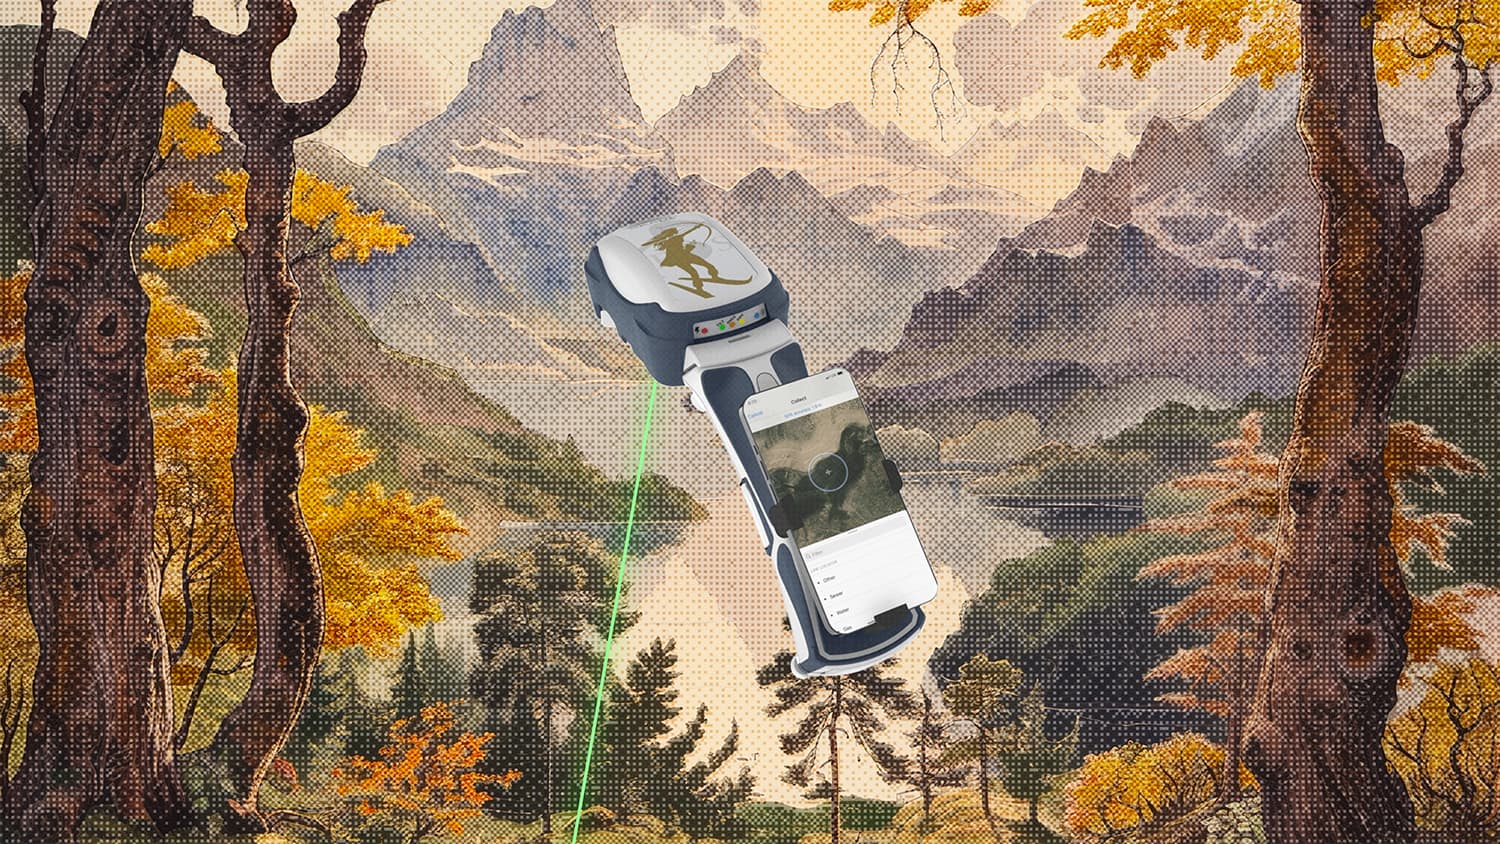 Skadi Smart Handle with Extensible Virtual Range Pole for shooting assets at short distances with high accuracy (GNSS) for GIS applications, compatible only with Skadi Series GNSS receivers from Eos Positioning Systems